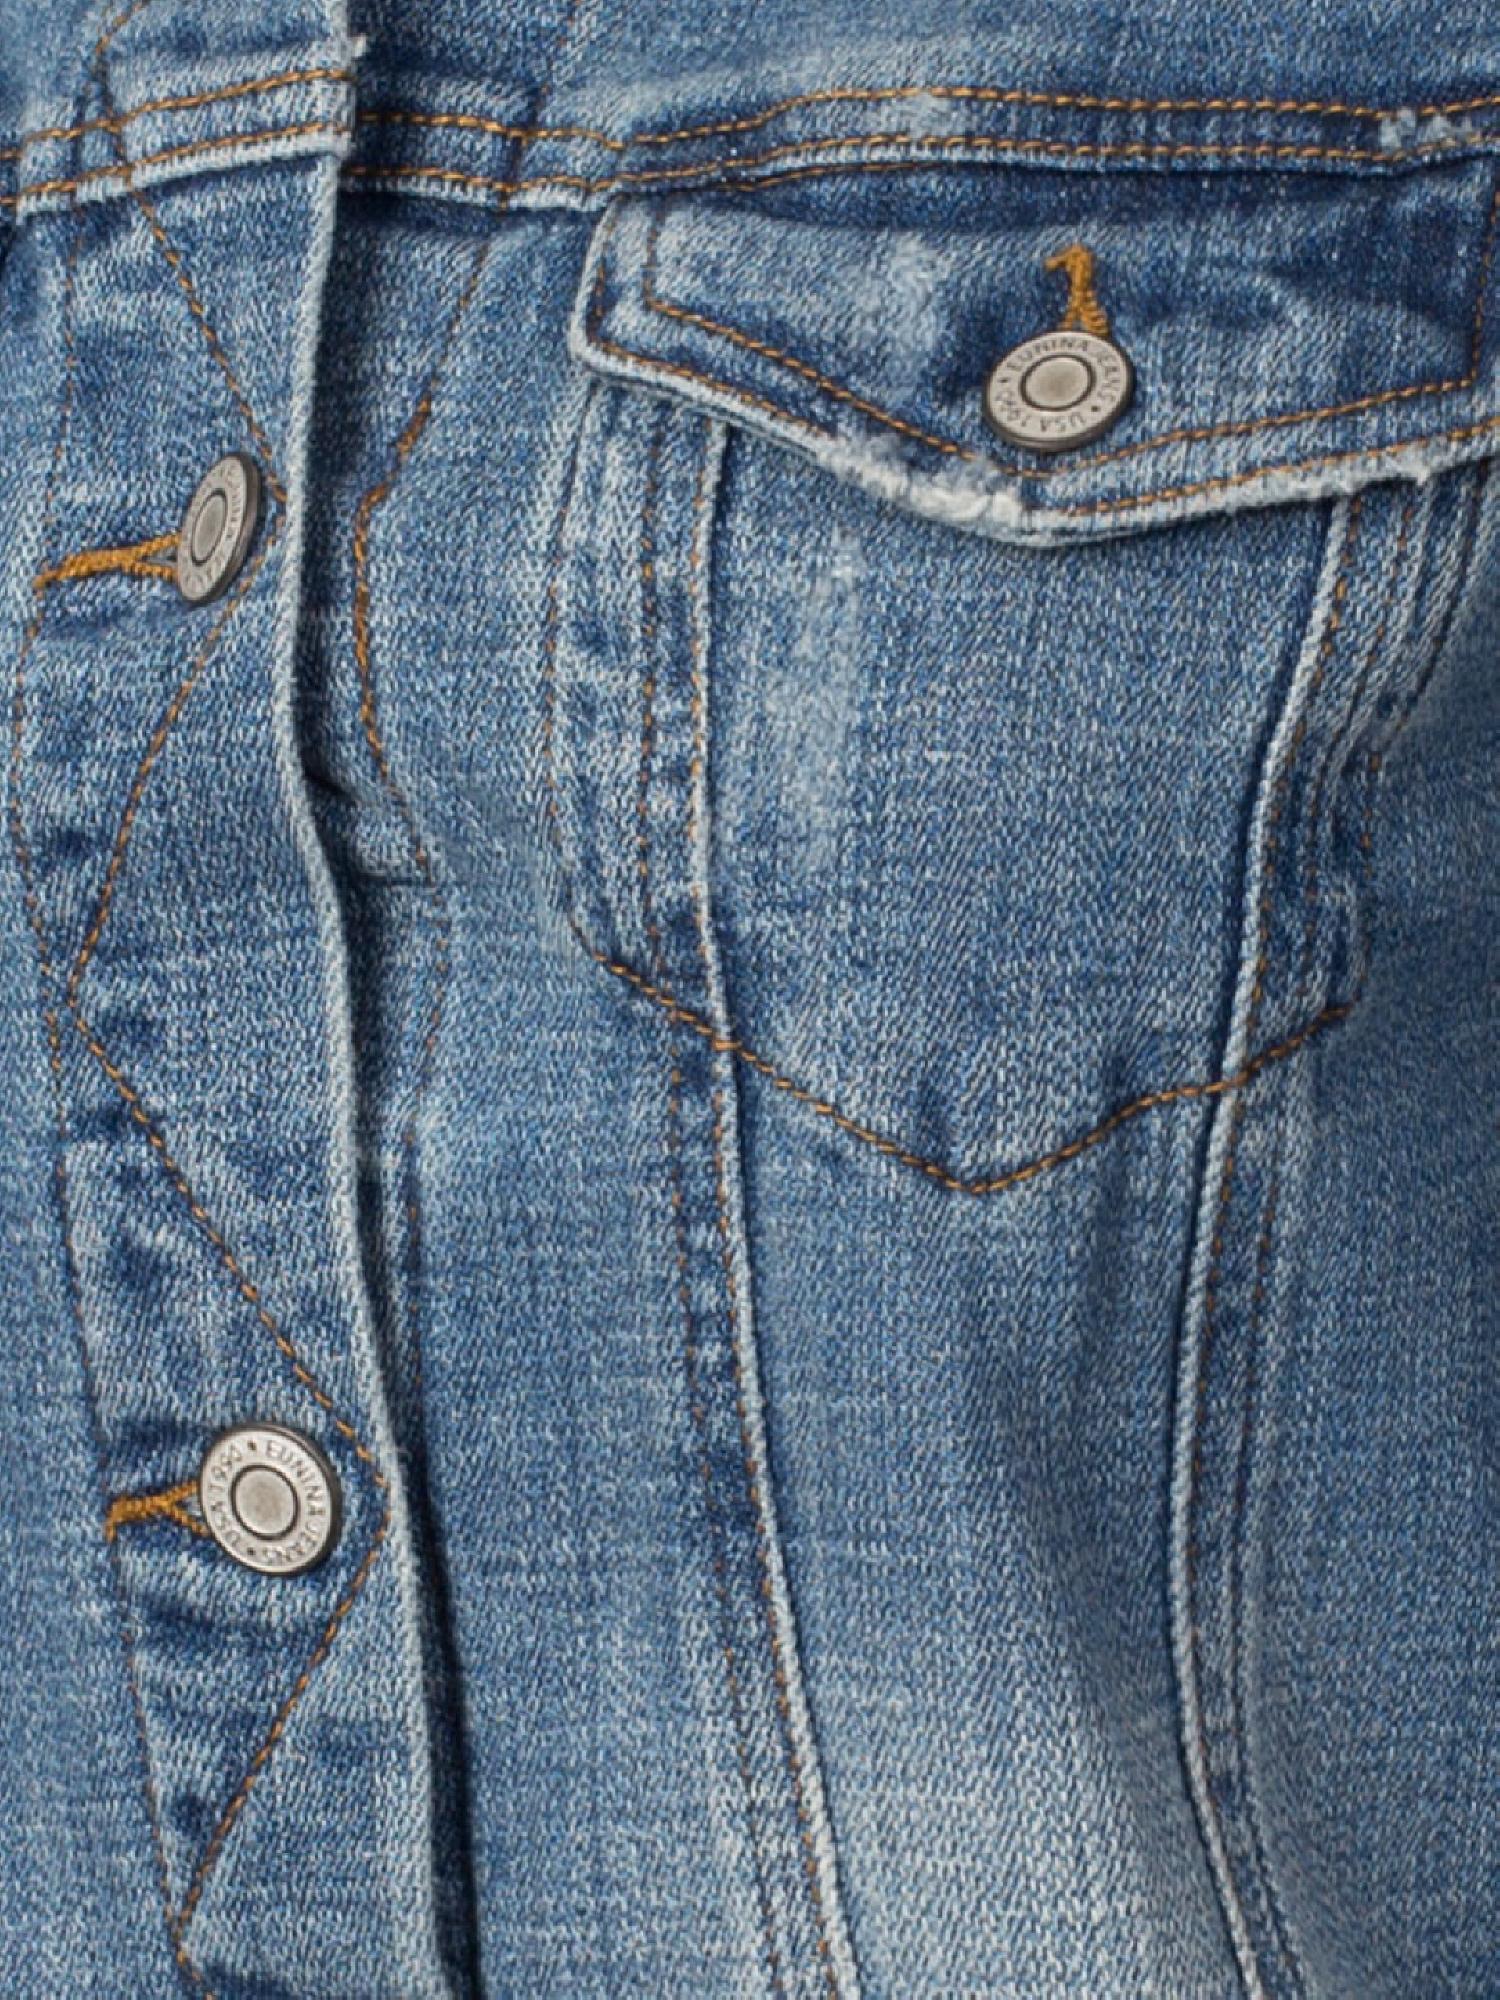 Made by Olivia Women's Classic Casual Vintage Denim Jean Jacket - image 5 of 5